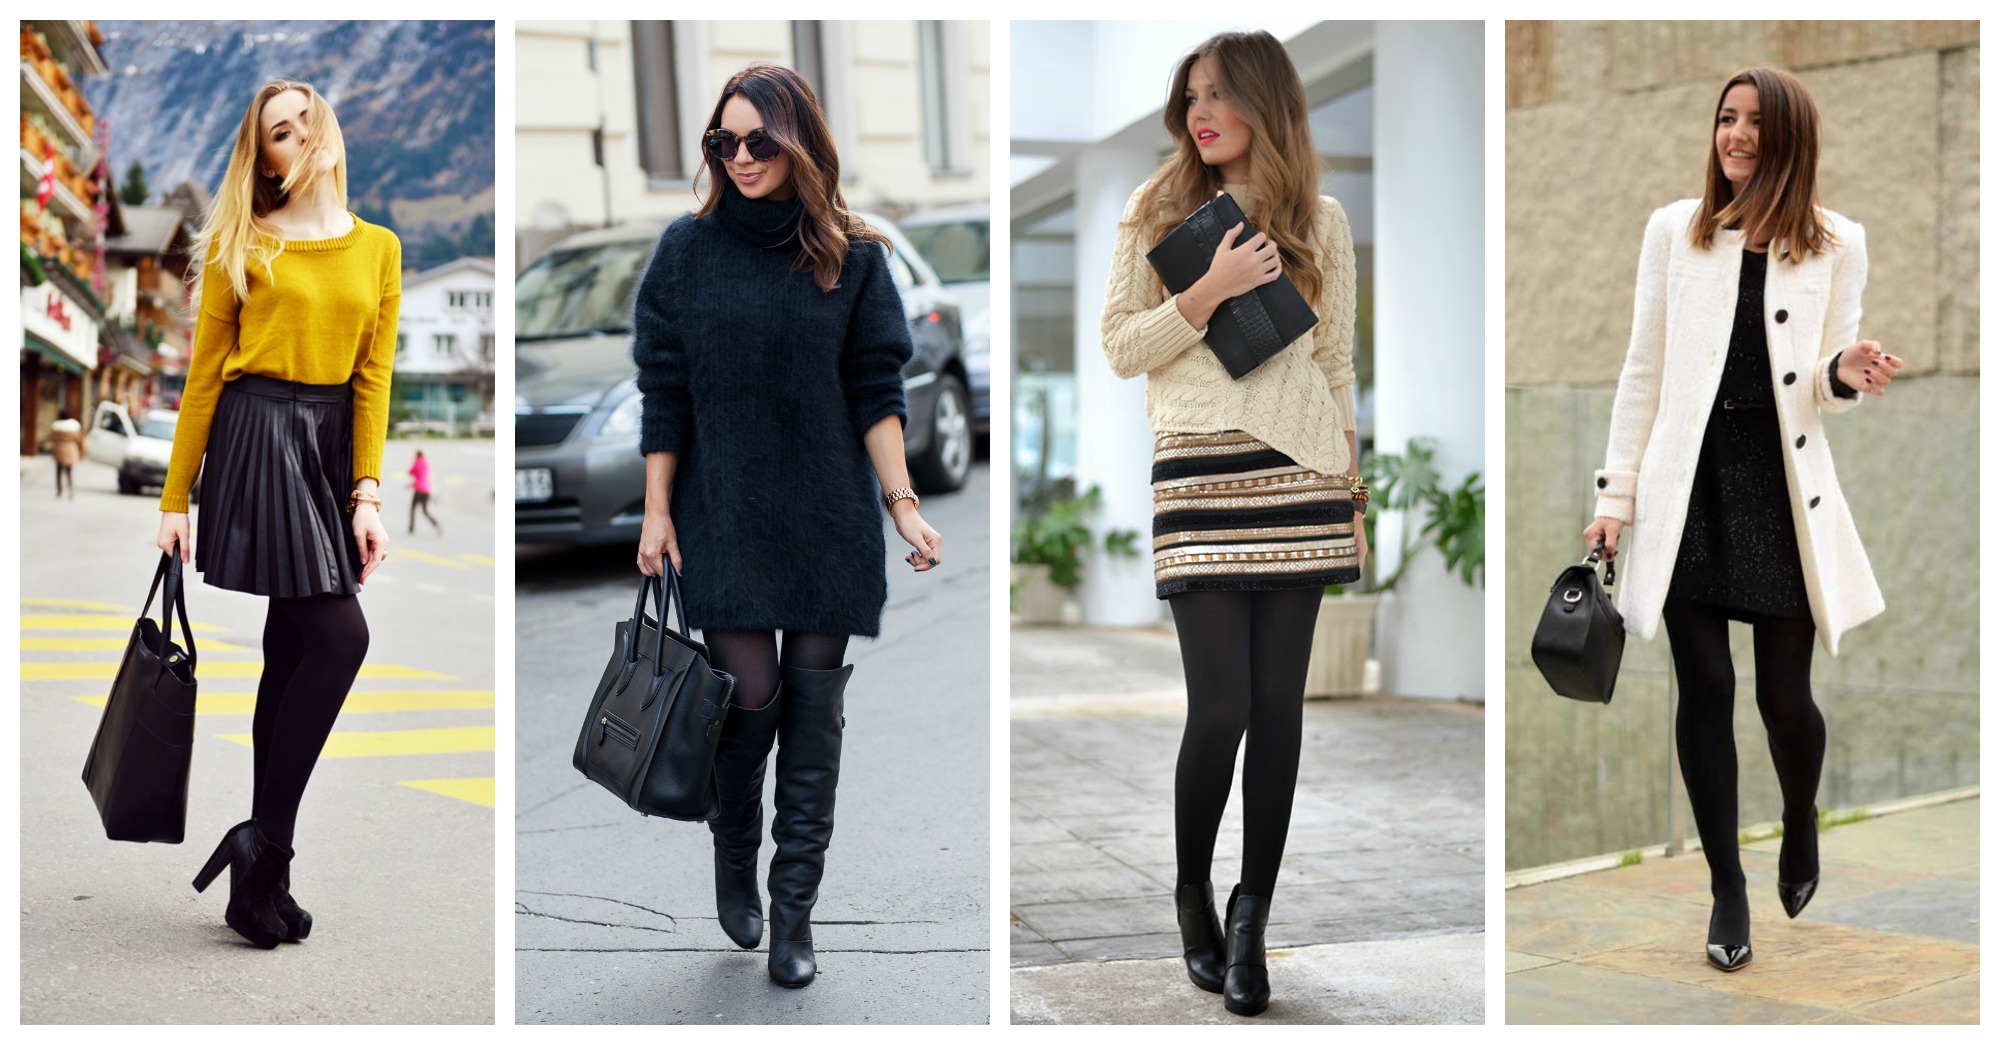 Black Tights Are The Must-Have Accessories For This Winter - fashionsy.com